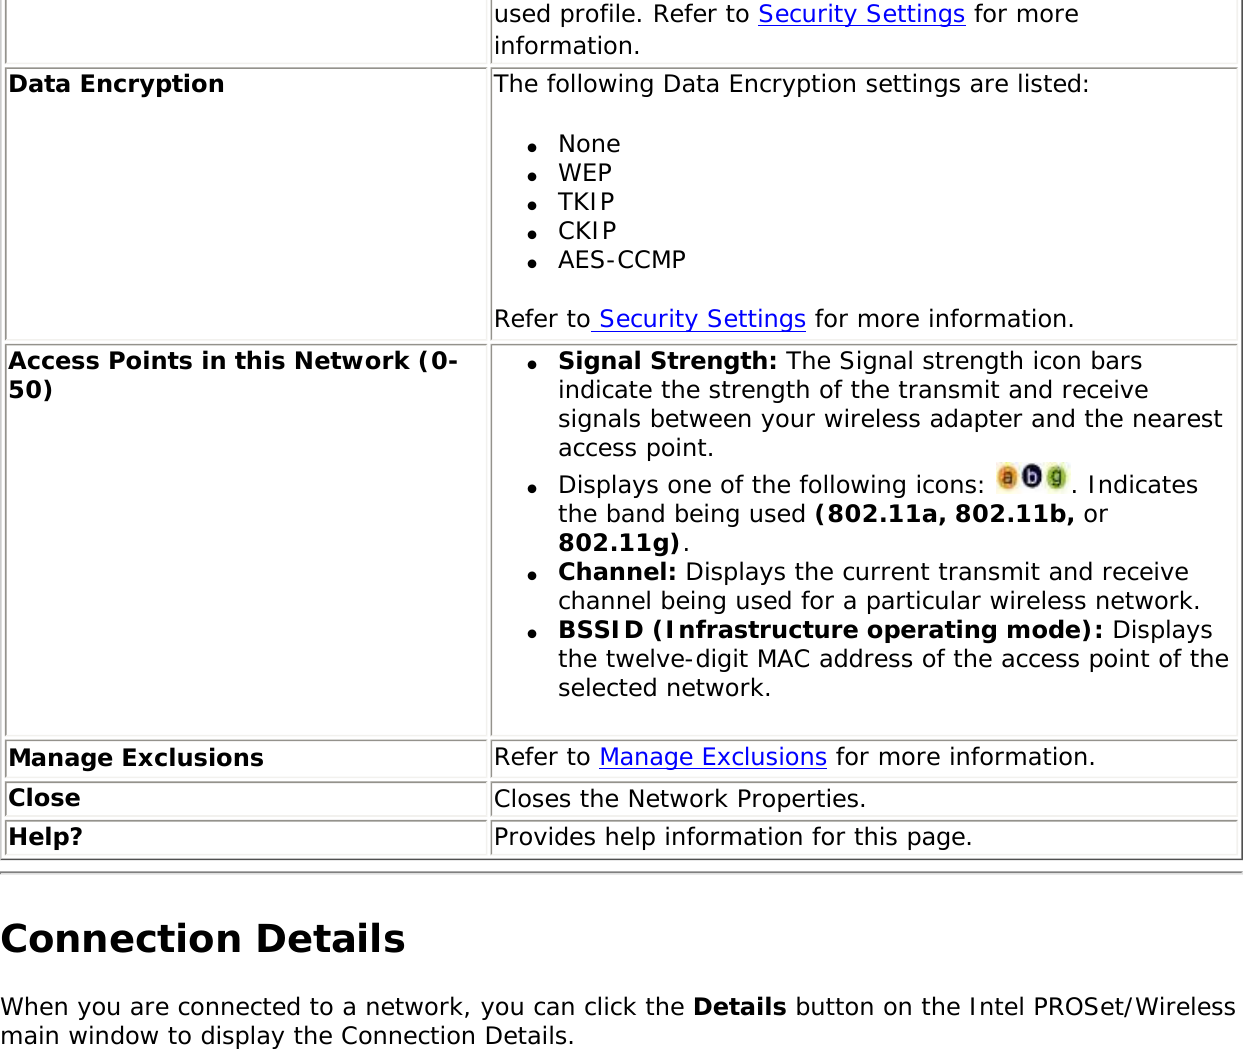 used profile. Refer to Security Settings for more information.Data Encryption The following Data Encryption settings are listed: ●     None●     WEP●     TKIP●     CKIP●     AES-CCMPRefer to Security Settings for more information.Access Points in this Network (0-50) ●     Signal Strength: The Signal strength icon bars indicate the strength of the transmit and receive signals between your wireless adapter and the nearest access point.●     Displays one of the following icons:  . Indicates the band being used (802.11a, 802.11b, or 802.11g). ●     Channel: Displays the current transmit and receive channel being used for a particular wireless network.●     BSSID (Infrastructure operating mode): Displays the twelve-digit MAC address of the access point of the selected network. Manage Exclusions  Refer to Manage Exclusions for more information.Close  Closes the Network Properties.Help? Provides help information for this page.Connection Details When you are connected to a network, you can click the Details button on the Intel PROSet/Wireless main window to display the Connection Details. 